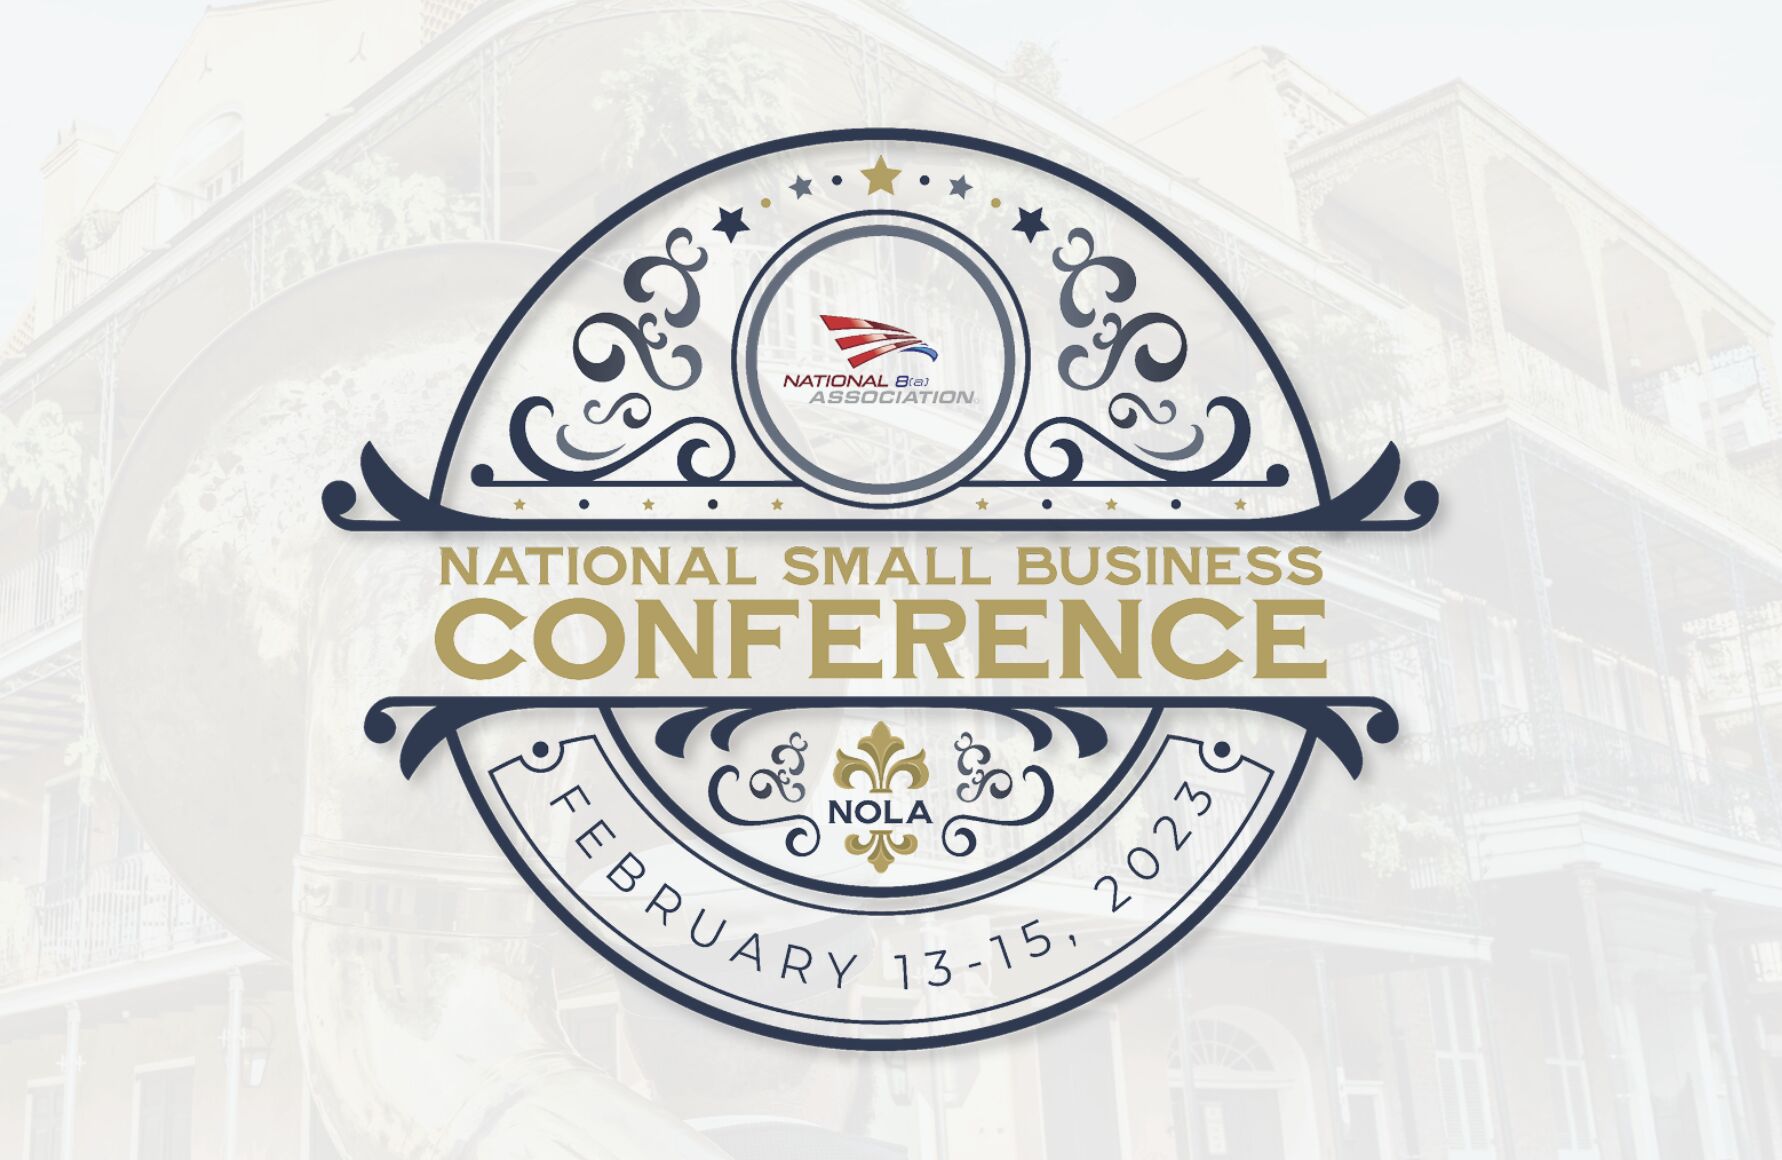 National 8(a) Small Business Conference Sponsor